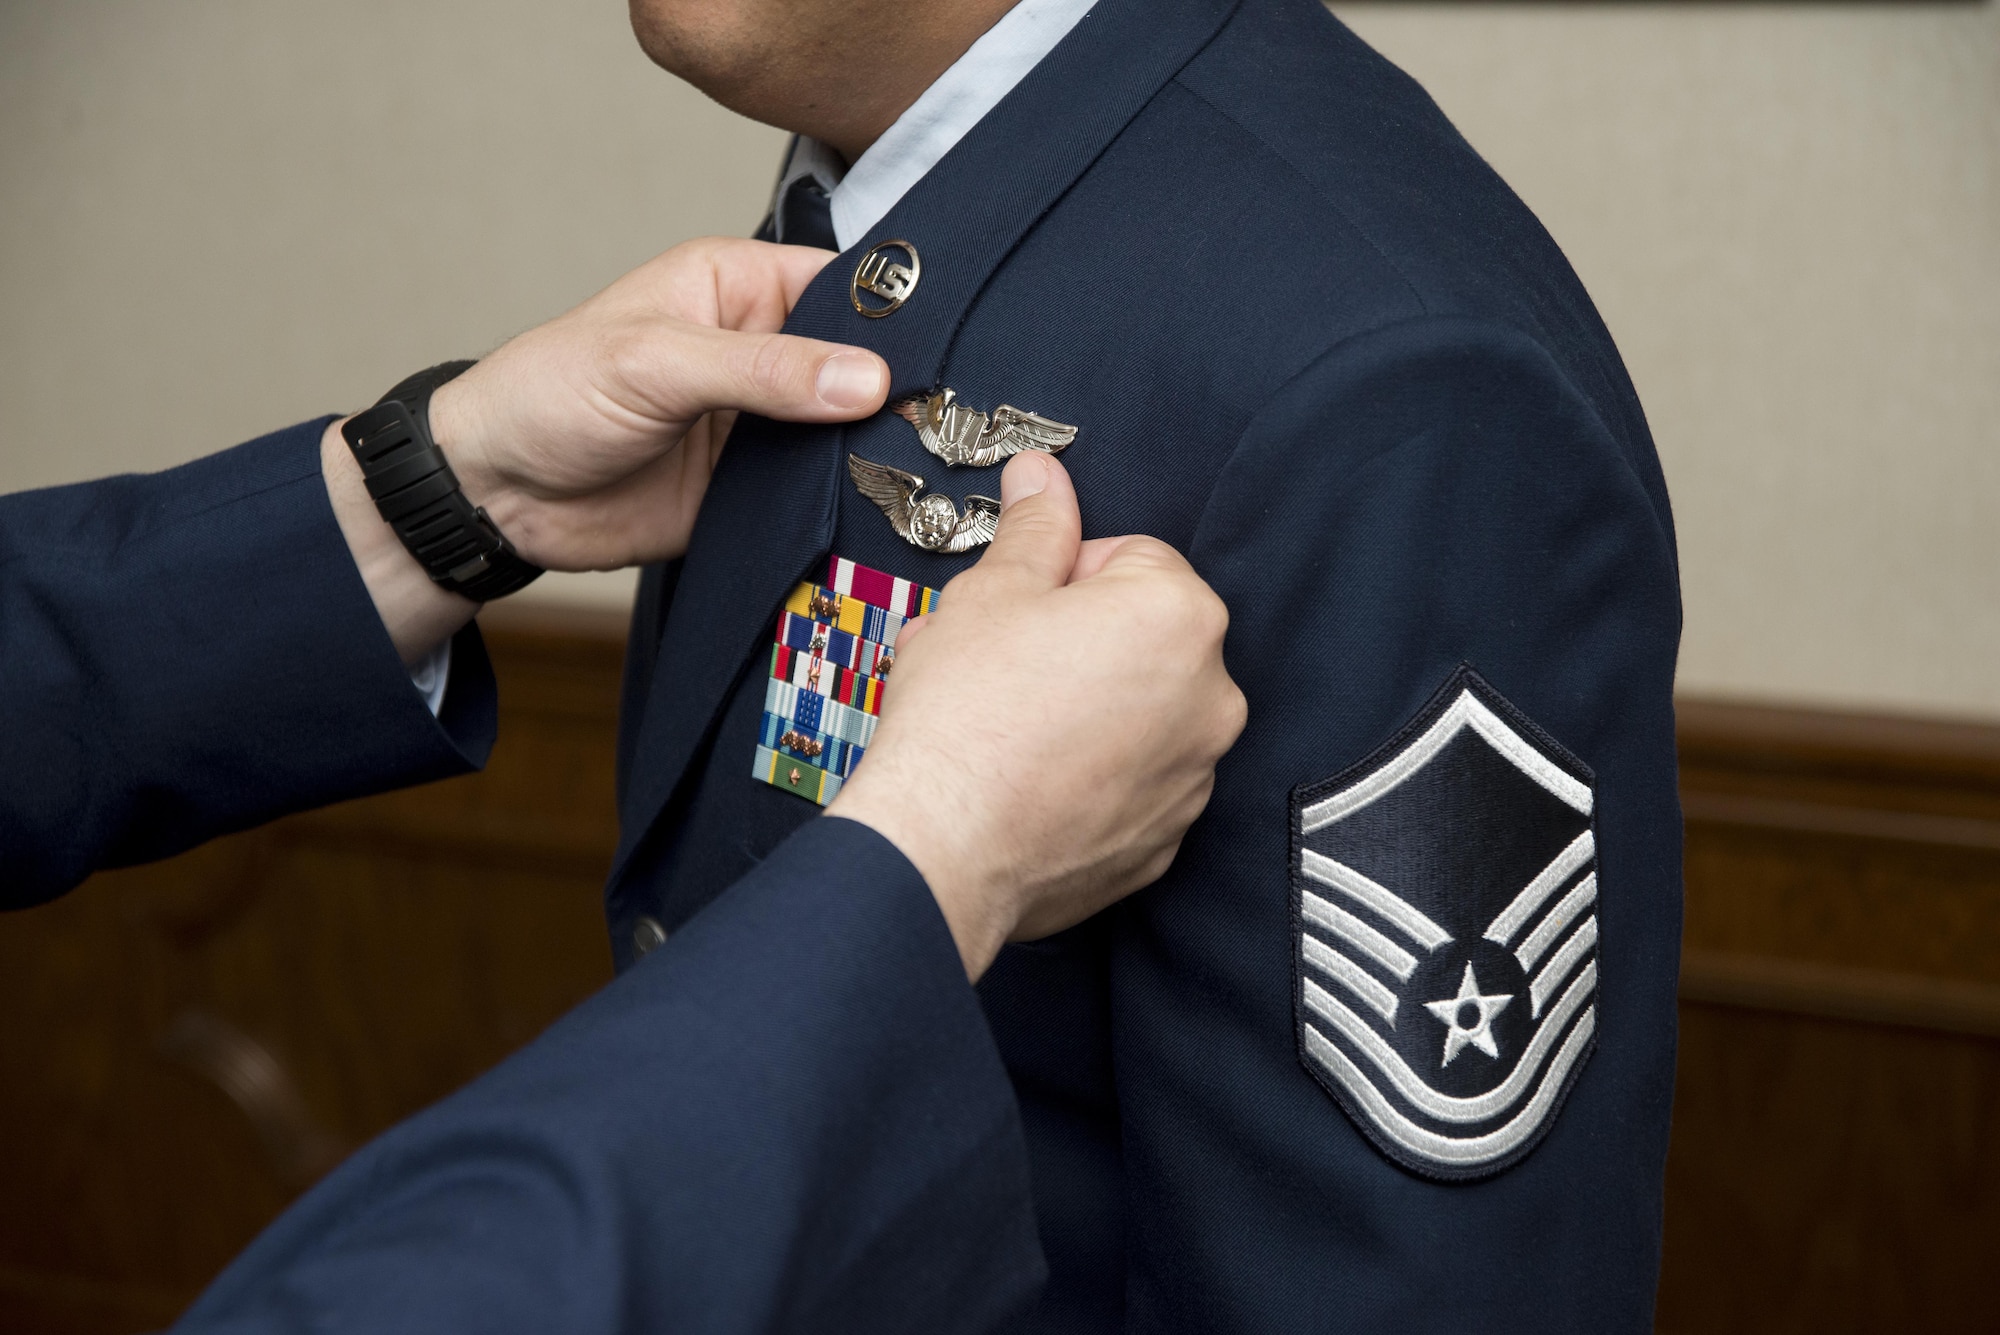 U.S. Air Force Master Sgt. Alex, Enlisted Pilot Initial Class student, has his wings pinned on during graduation from the 558th Flying Training Squadron's Remotely Piloted Aircraft Fundamentals Course May 5, 2017, at Joint Base San Antonio-Randolph, Texas.  Alex is one of the first three enlisted Airmen to graduate from the course, making him one of the service’s first enlisted pilots since 1961. (U.S. Air Force Photo by Melissa Peterson)